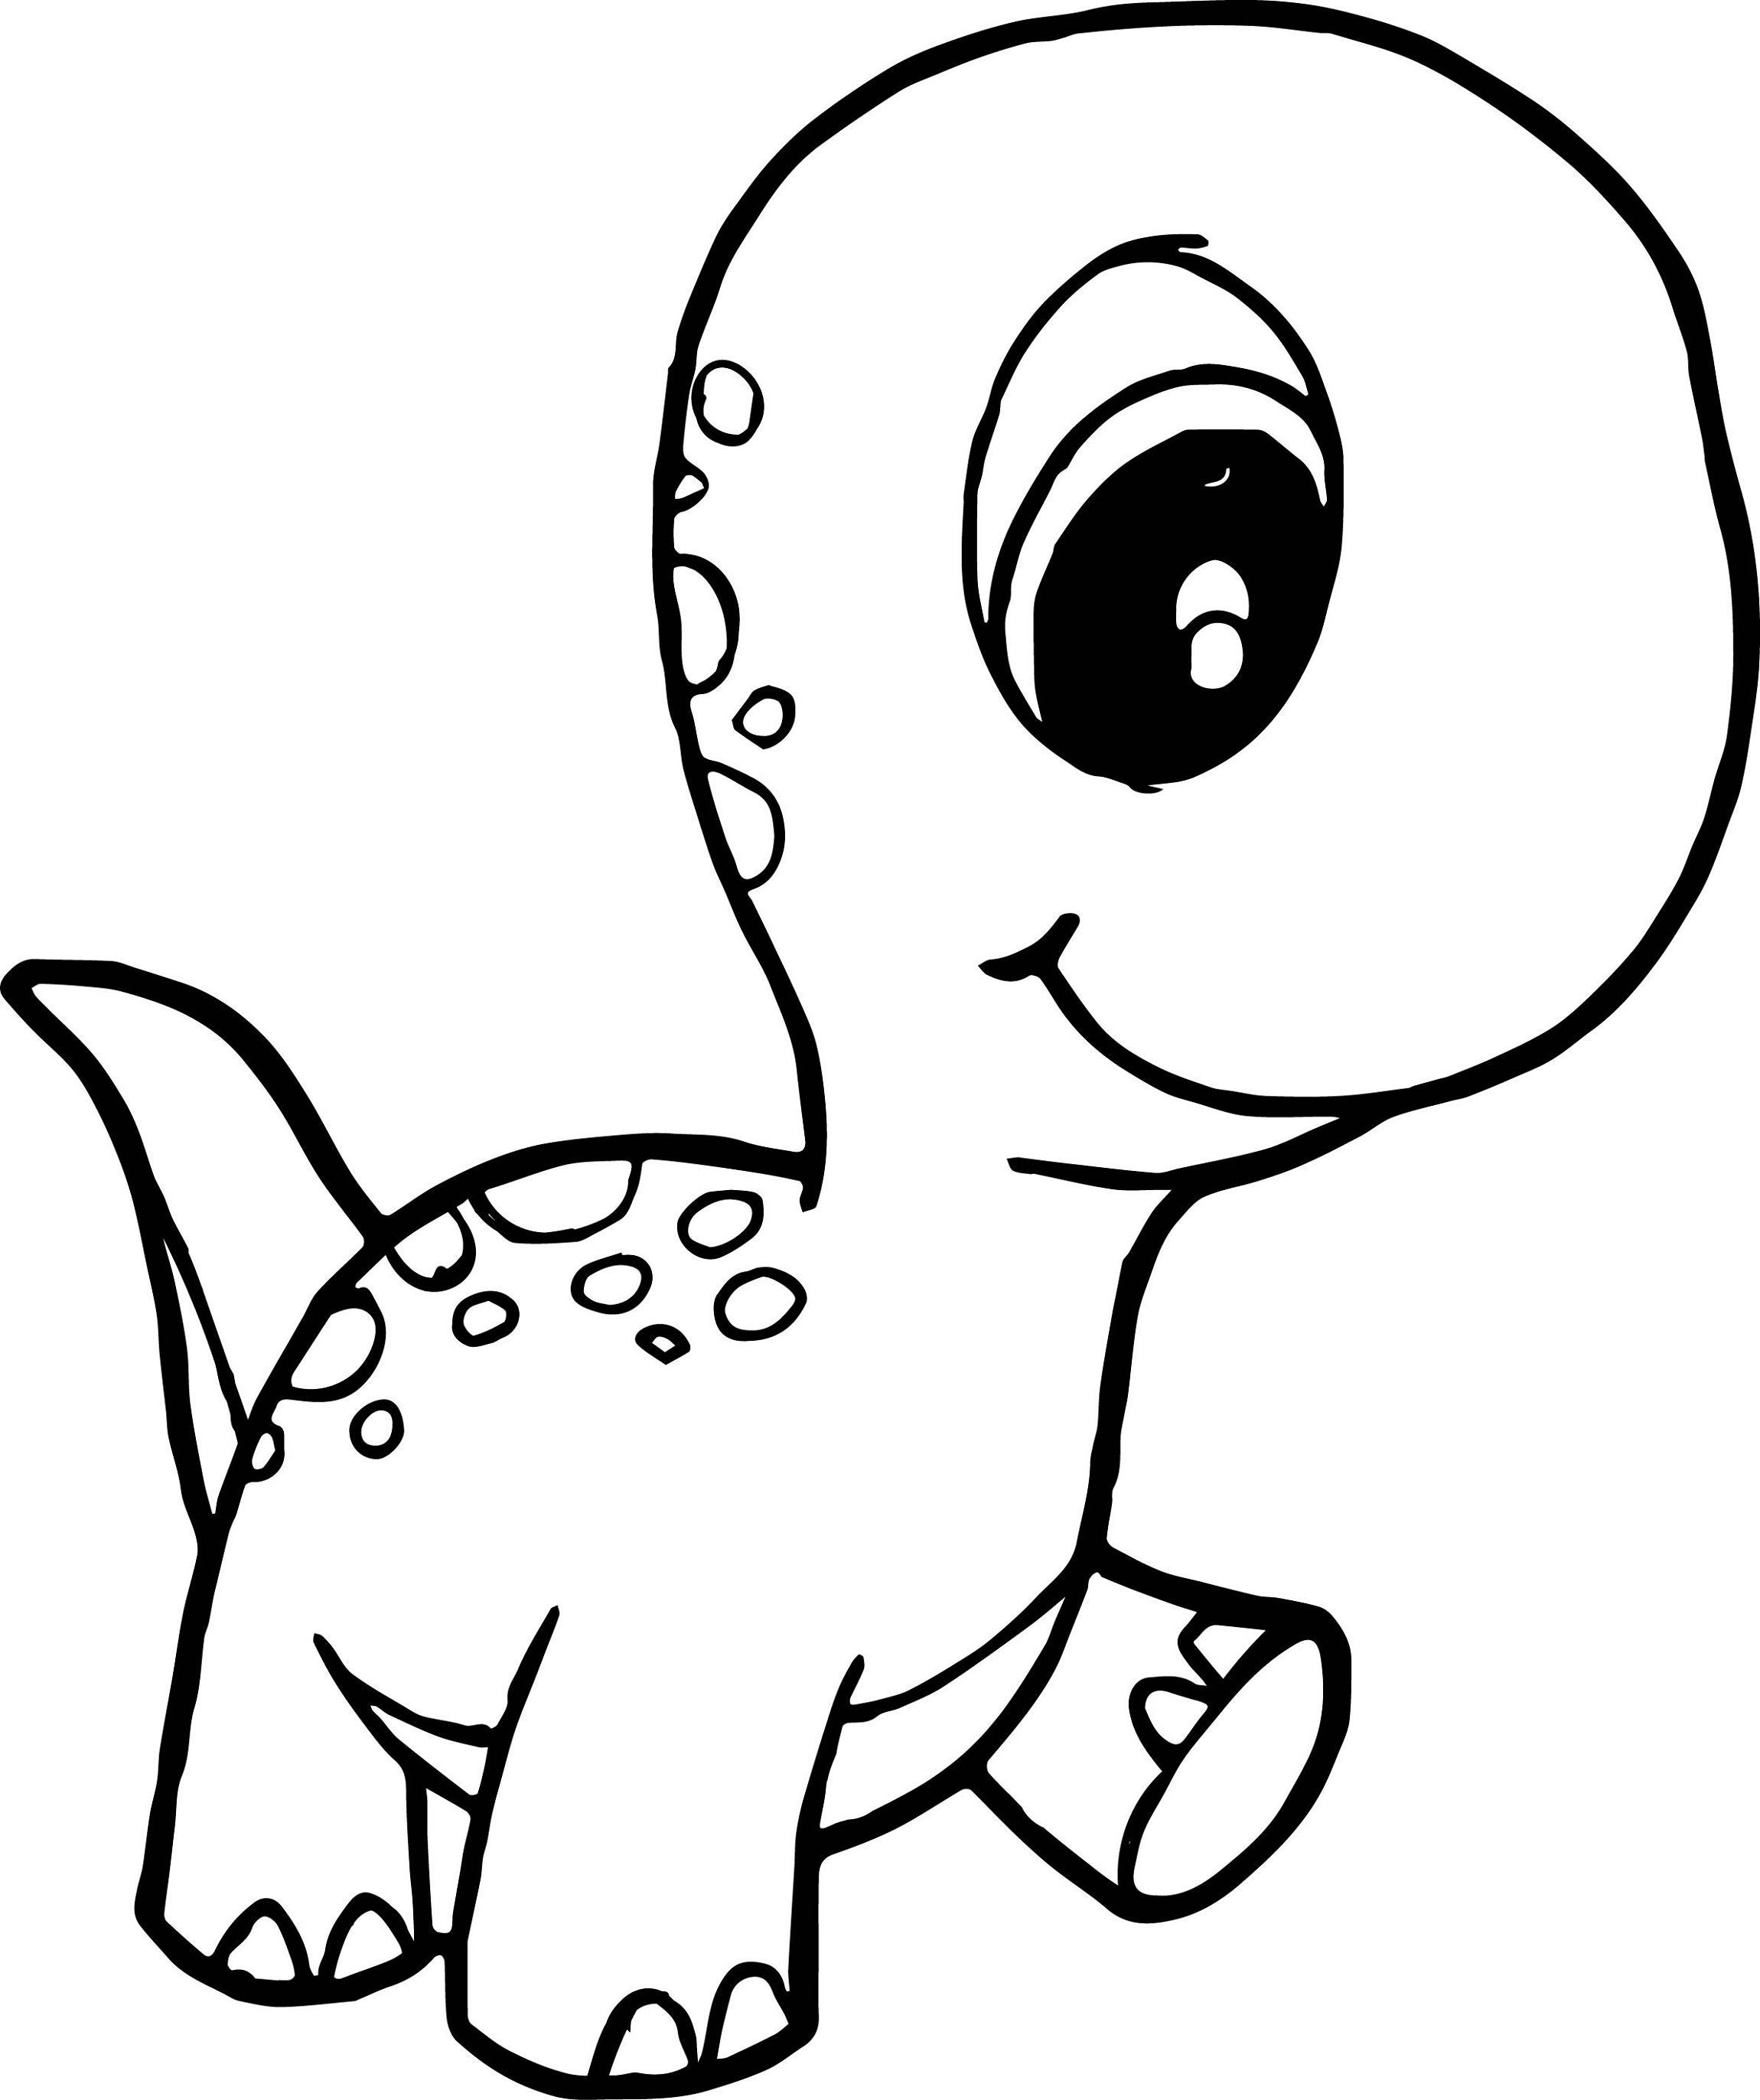 Baby dinosaur coloring pages for preschoolers activity shelter dinosaur coloring cute coloring pages cartoon coloring pages